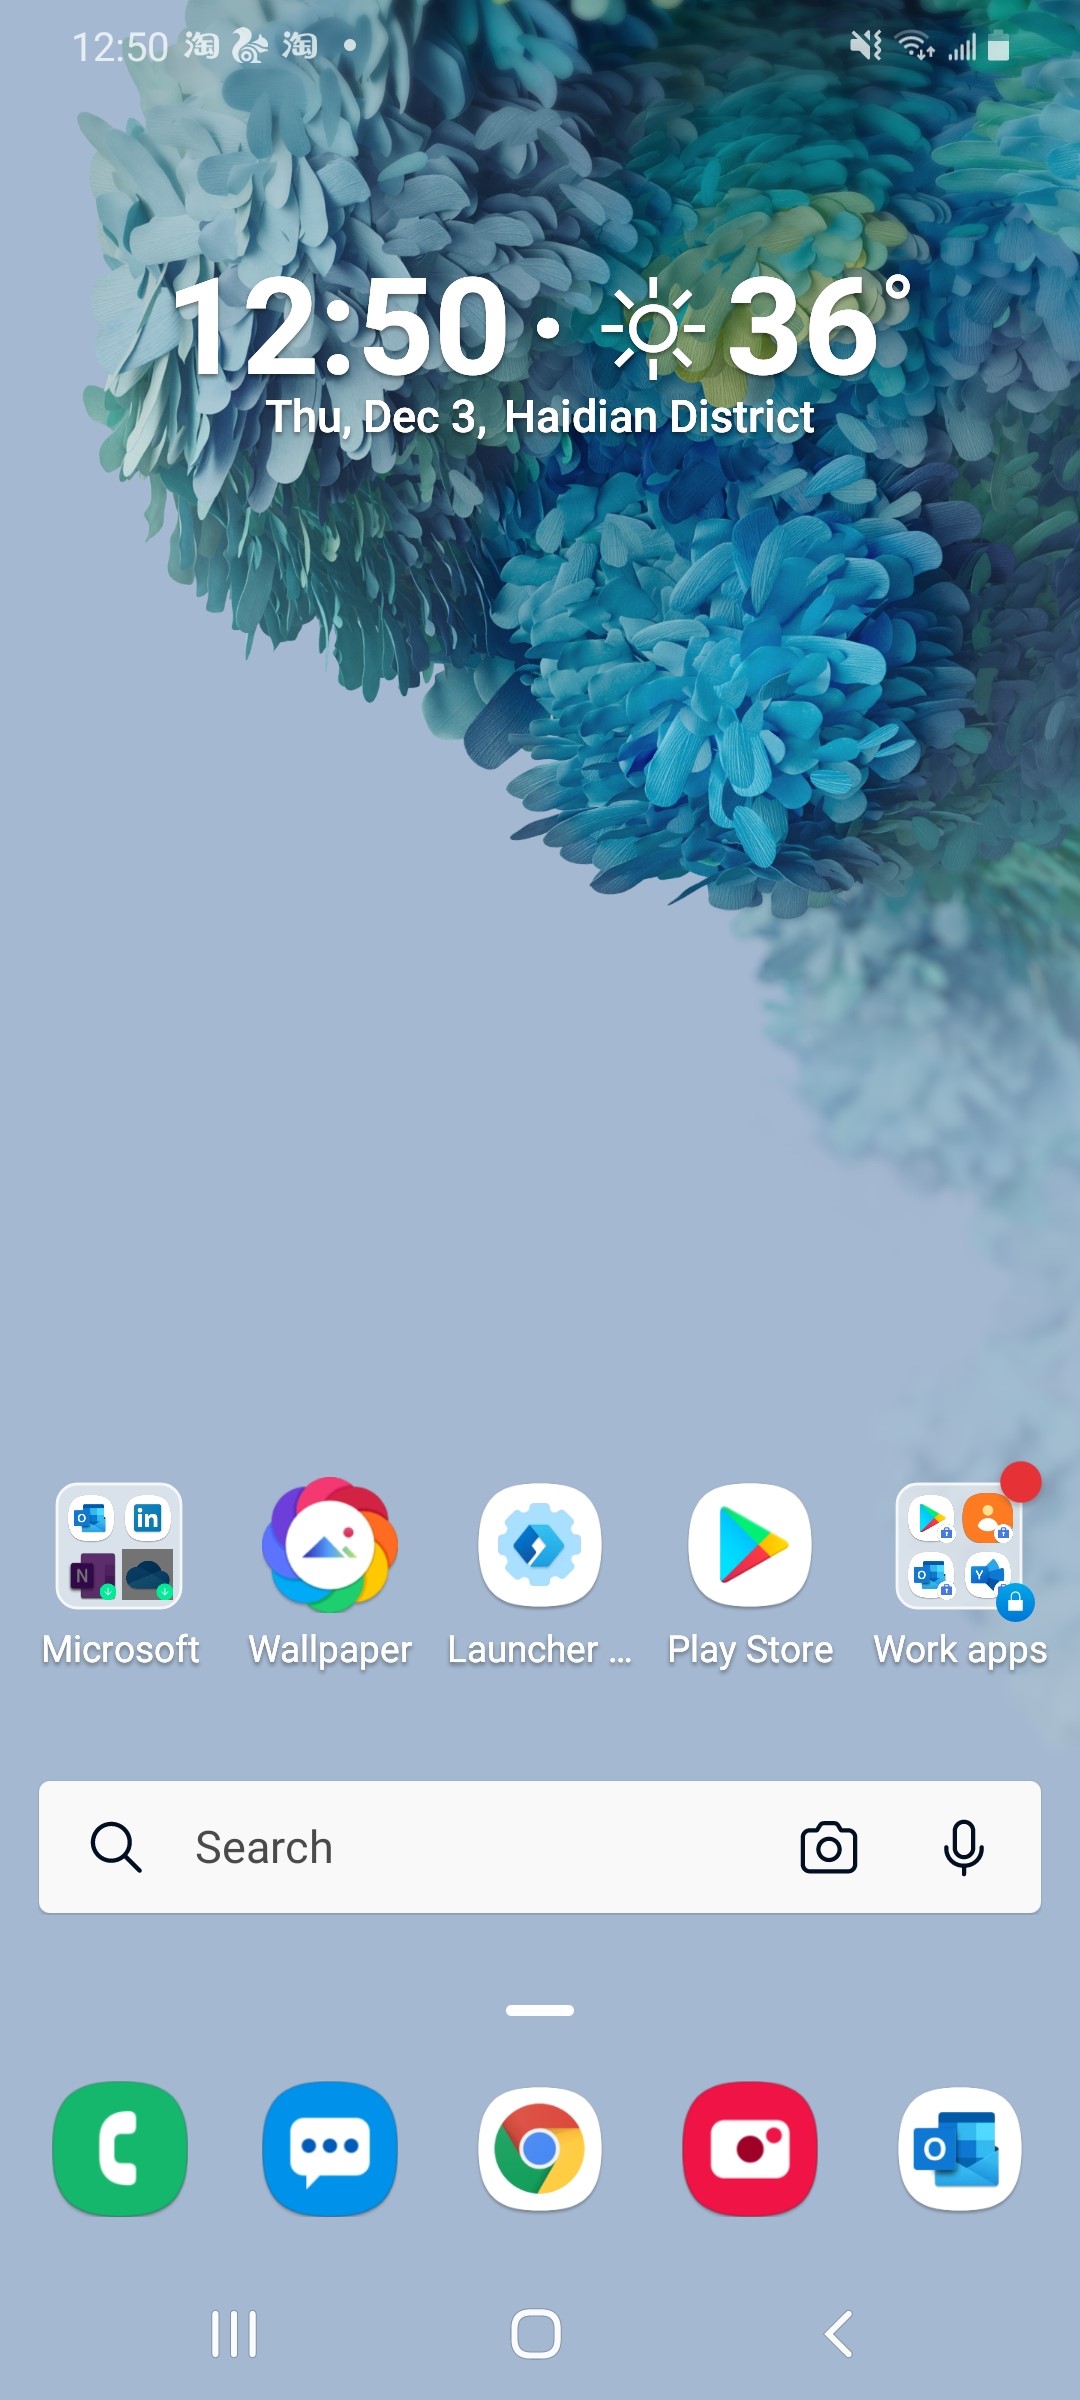 Using Microsoft Launcher on Android - Microsoft Support